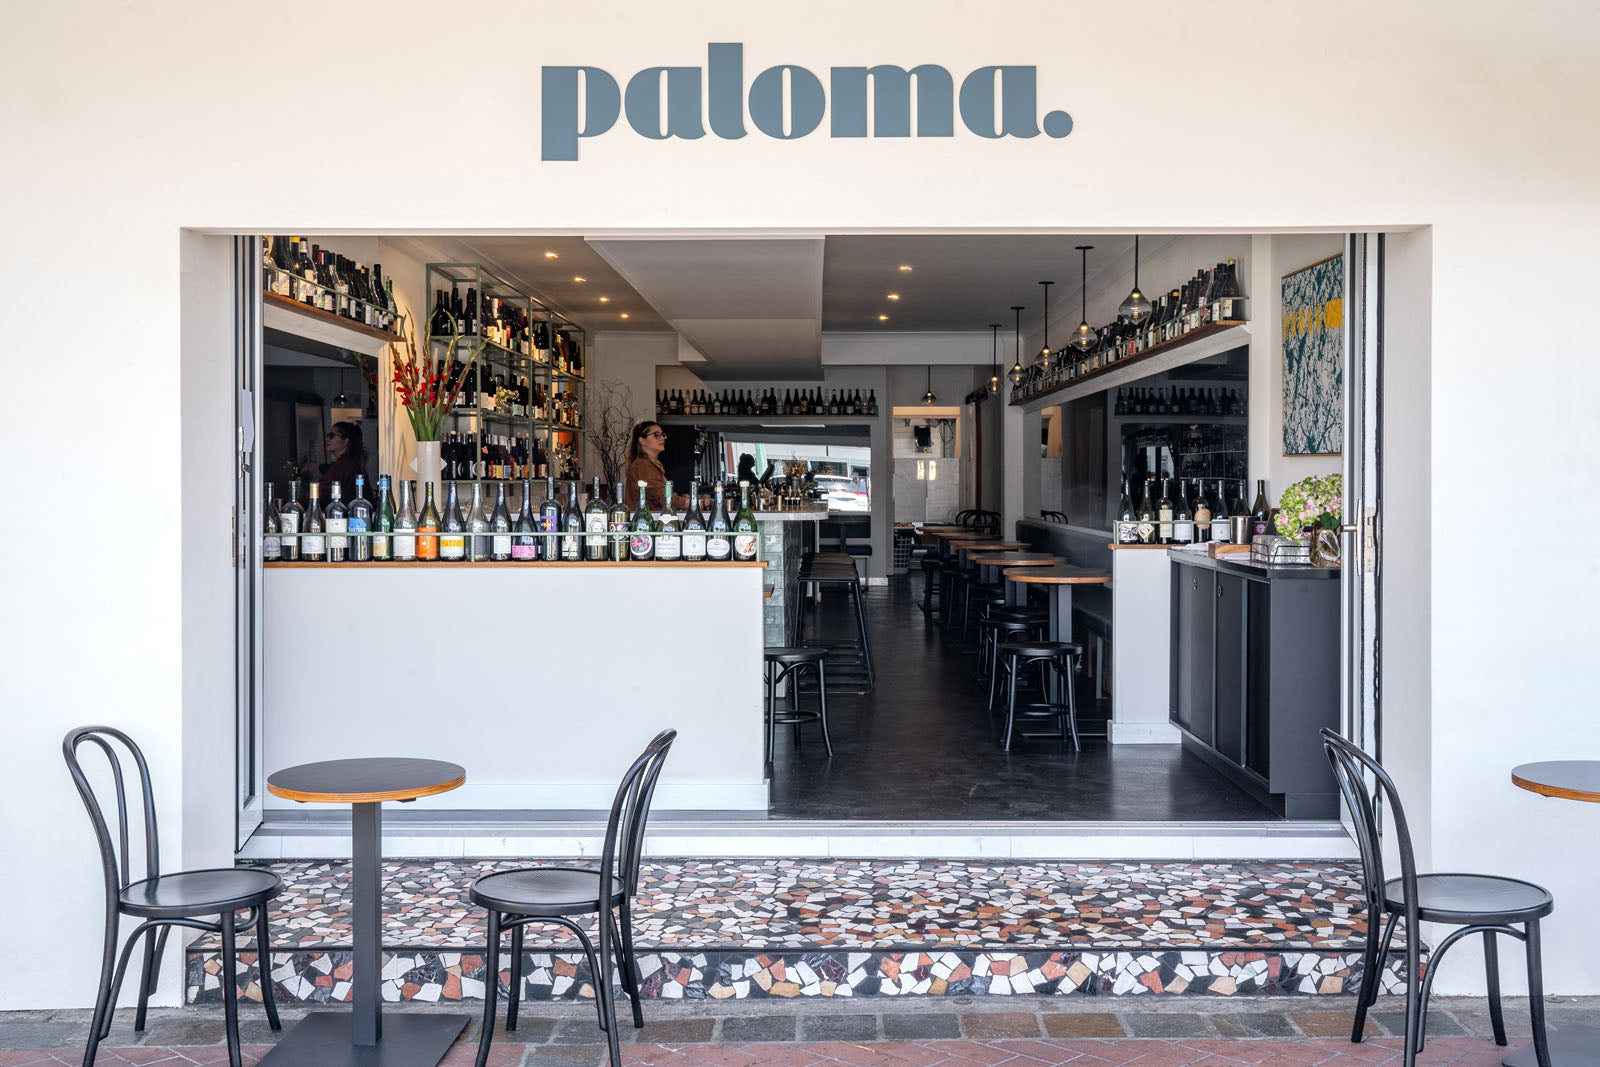 Paloma - what style of wine did you want to bring to the community